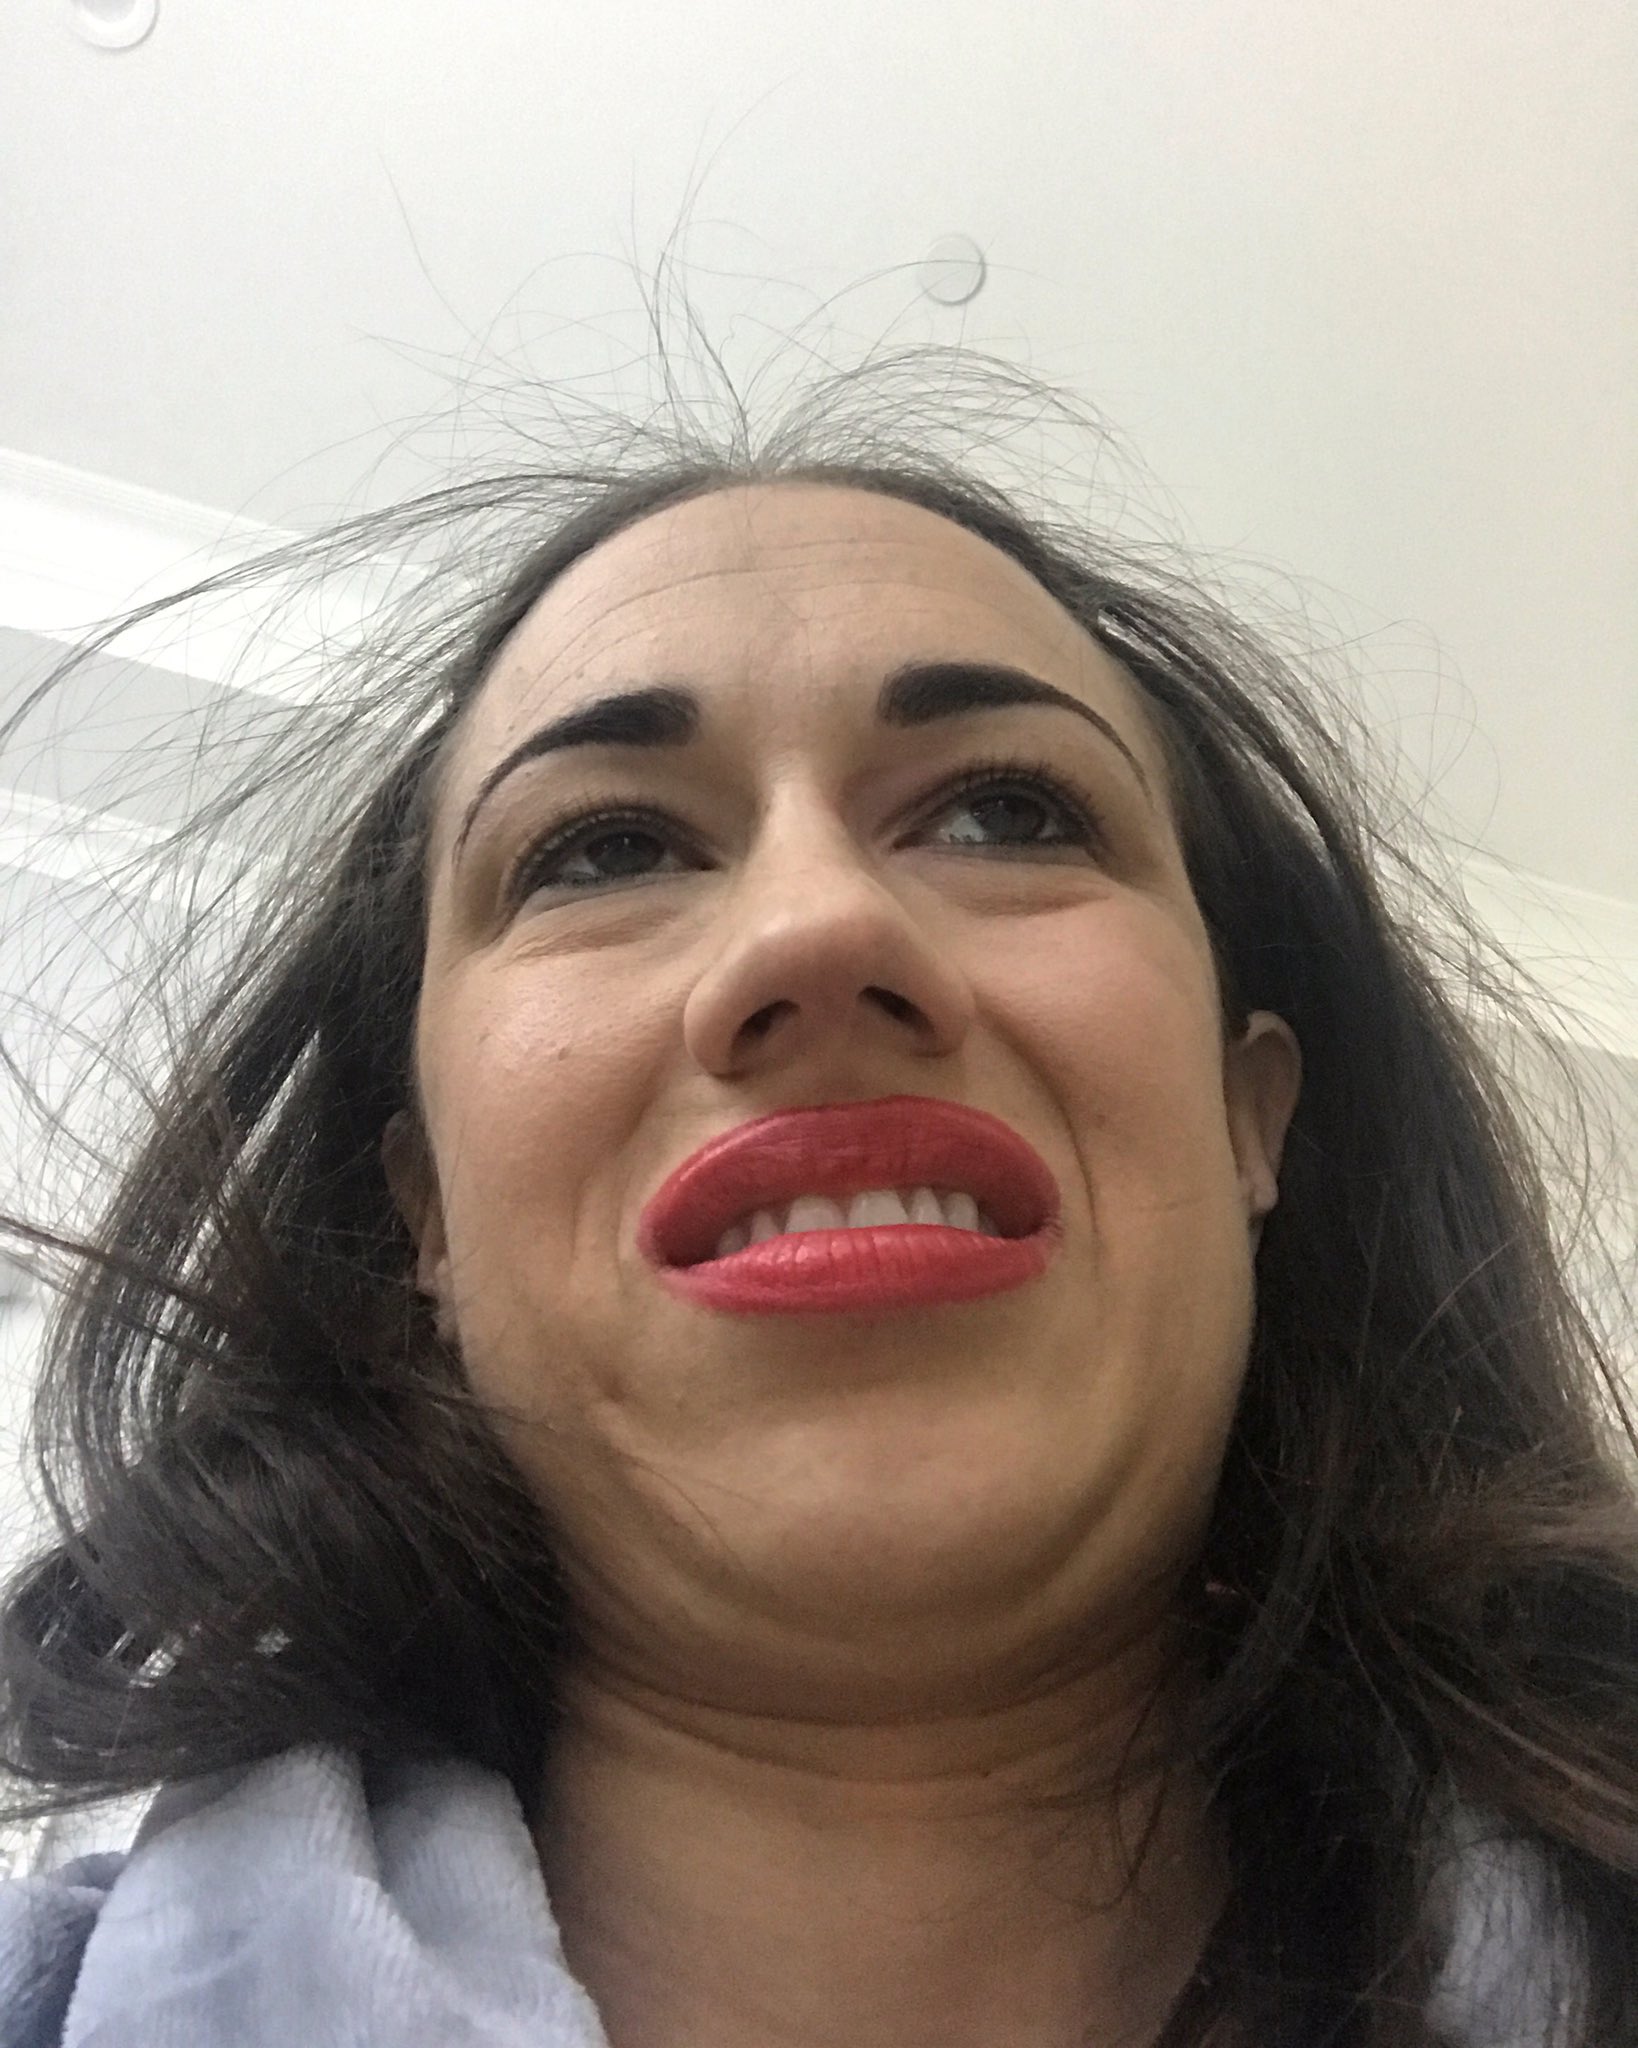 miranda sings on twitter   u0026quot 2016 was gr8  exited for 217